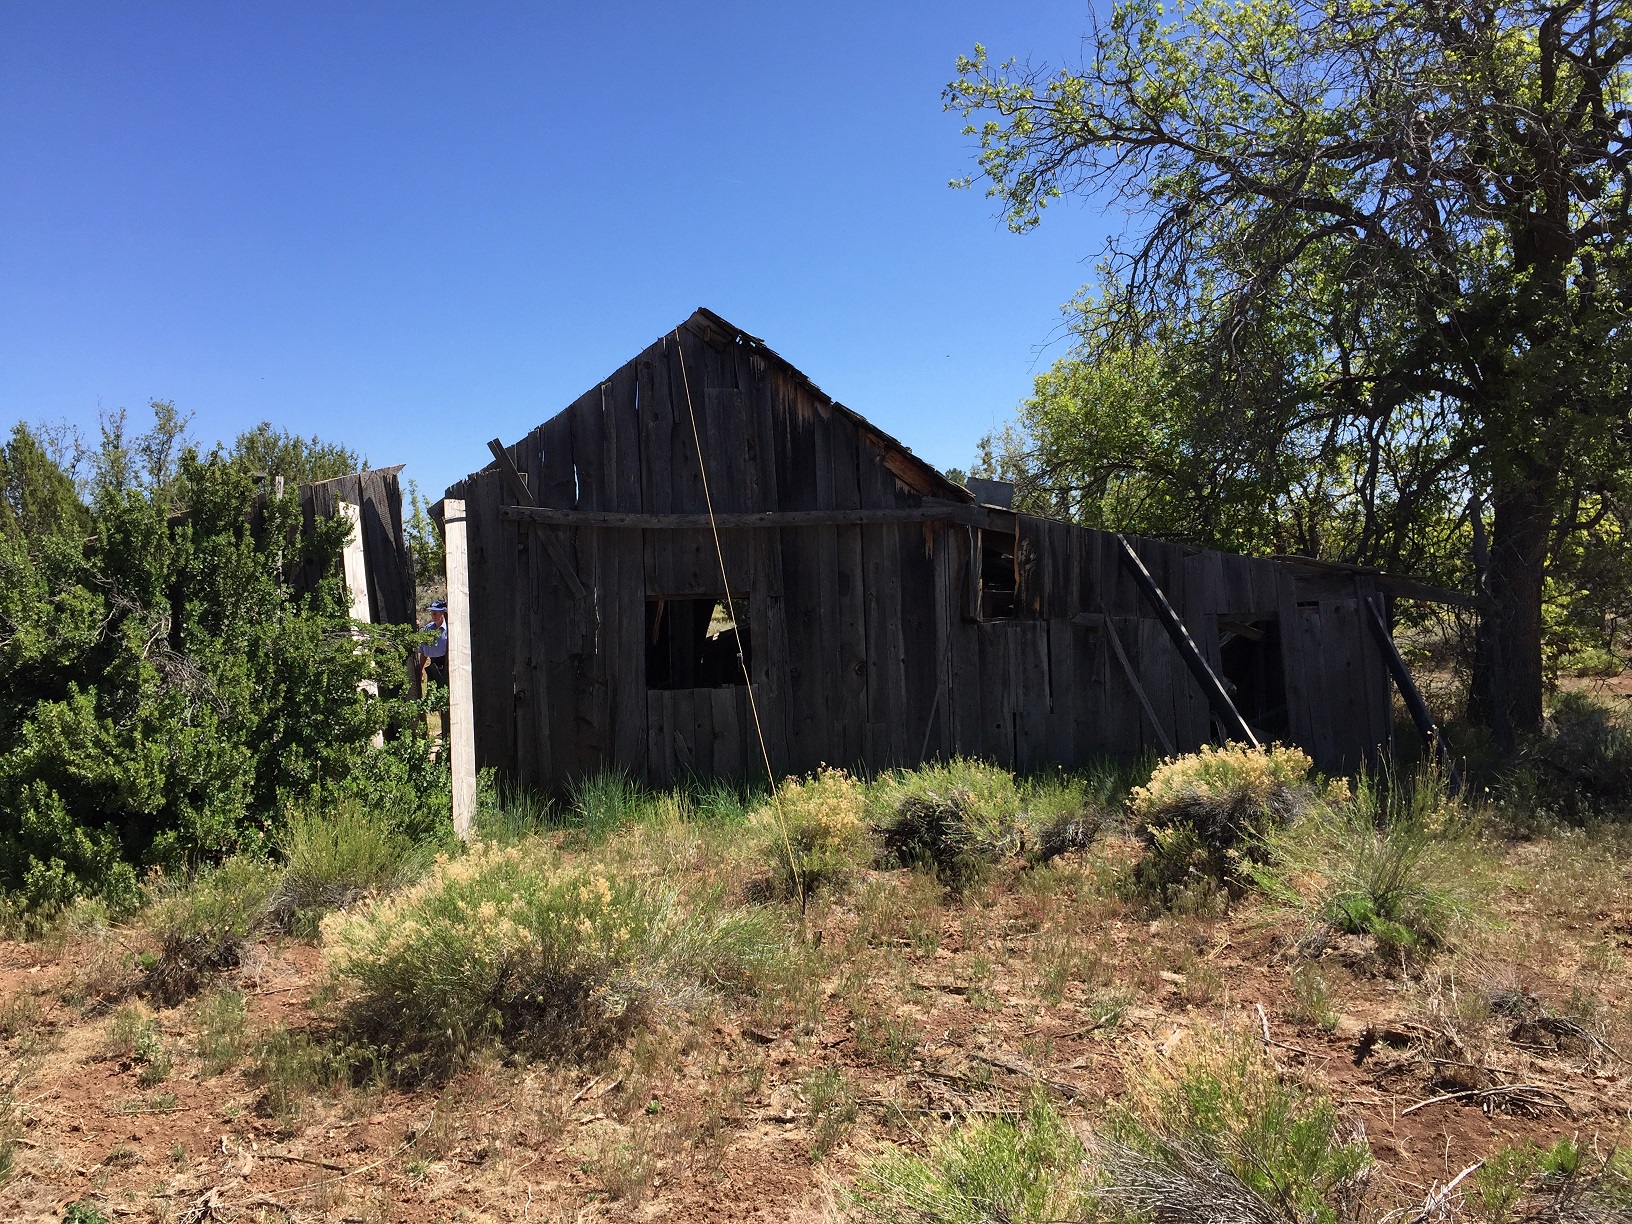 Remains of the old building at Oak Grove on the Arizona Strip